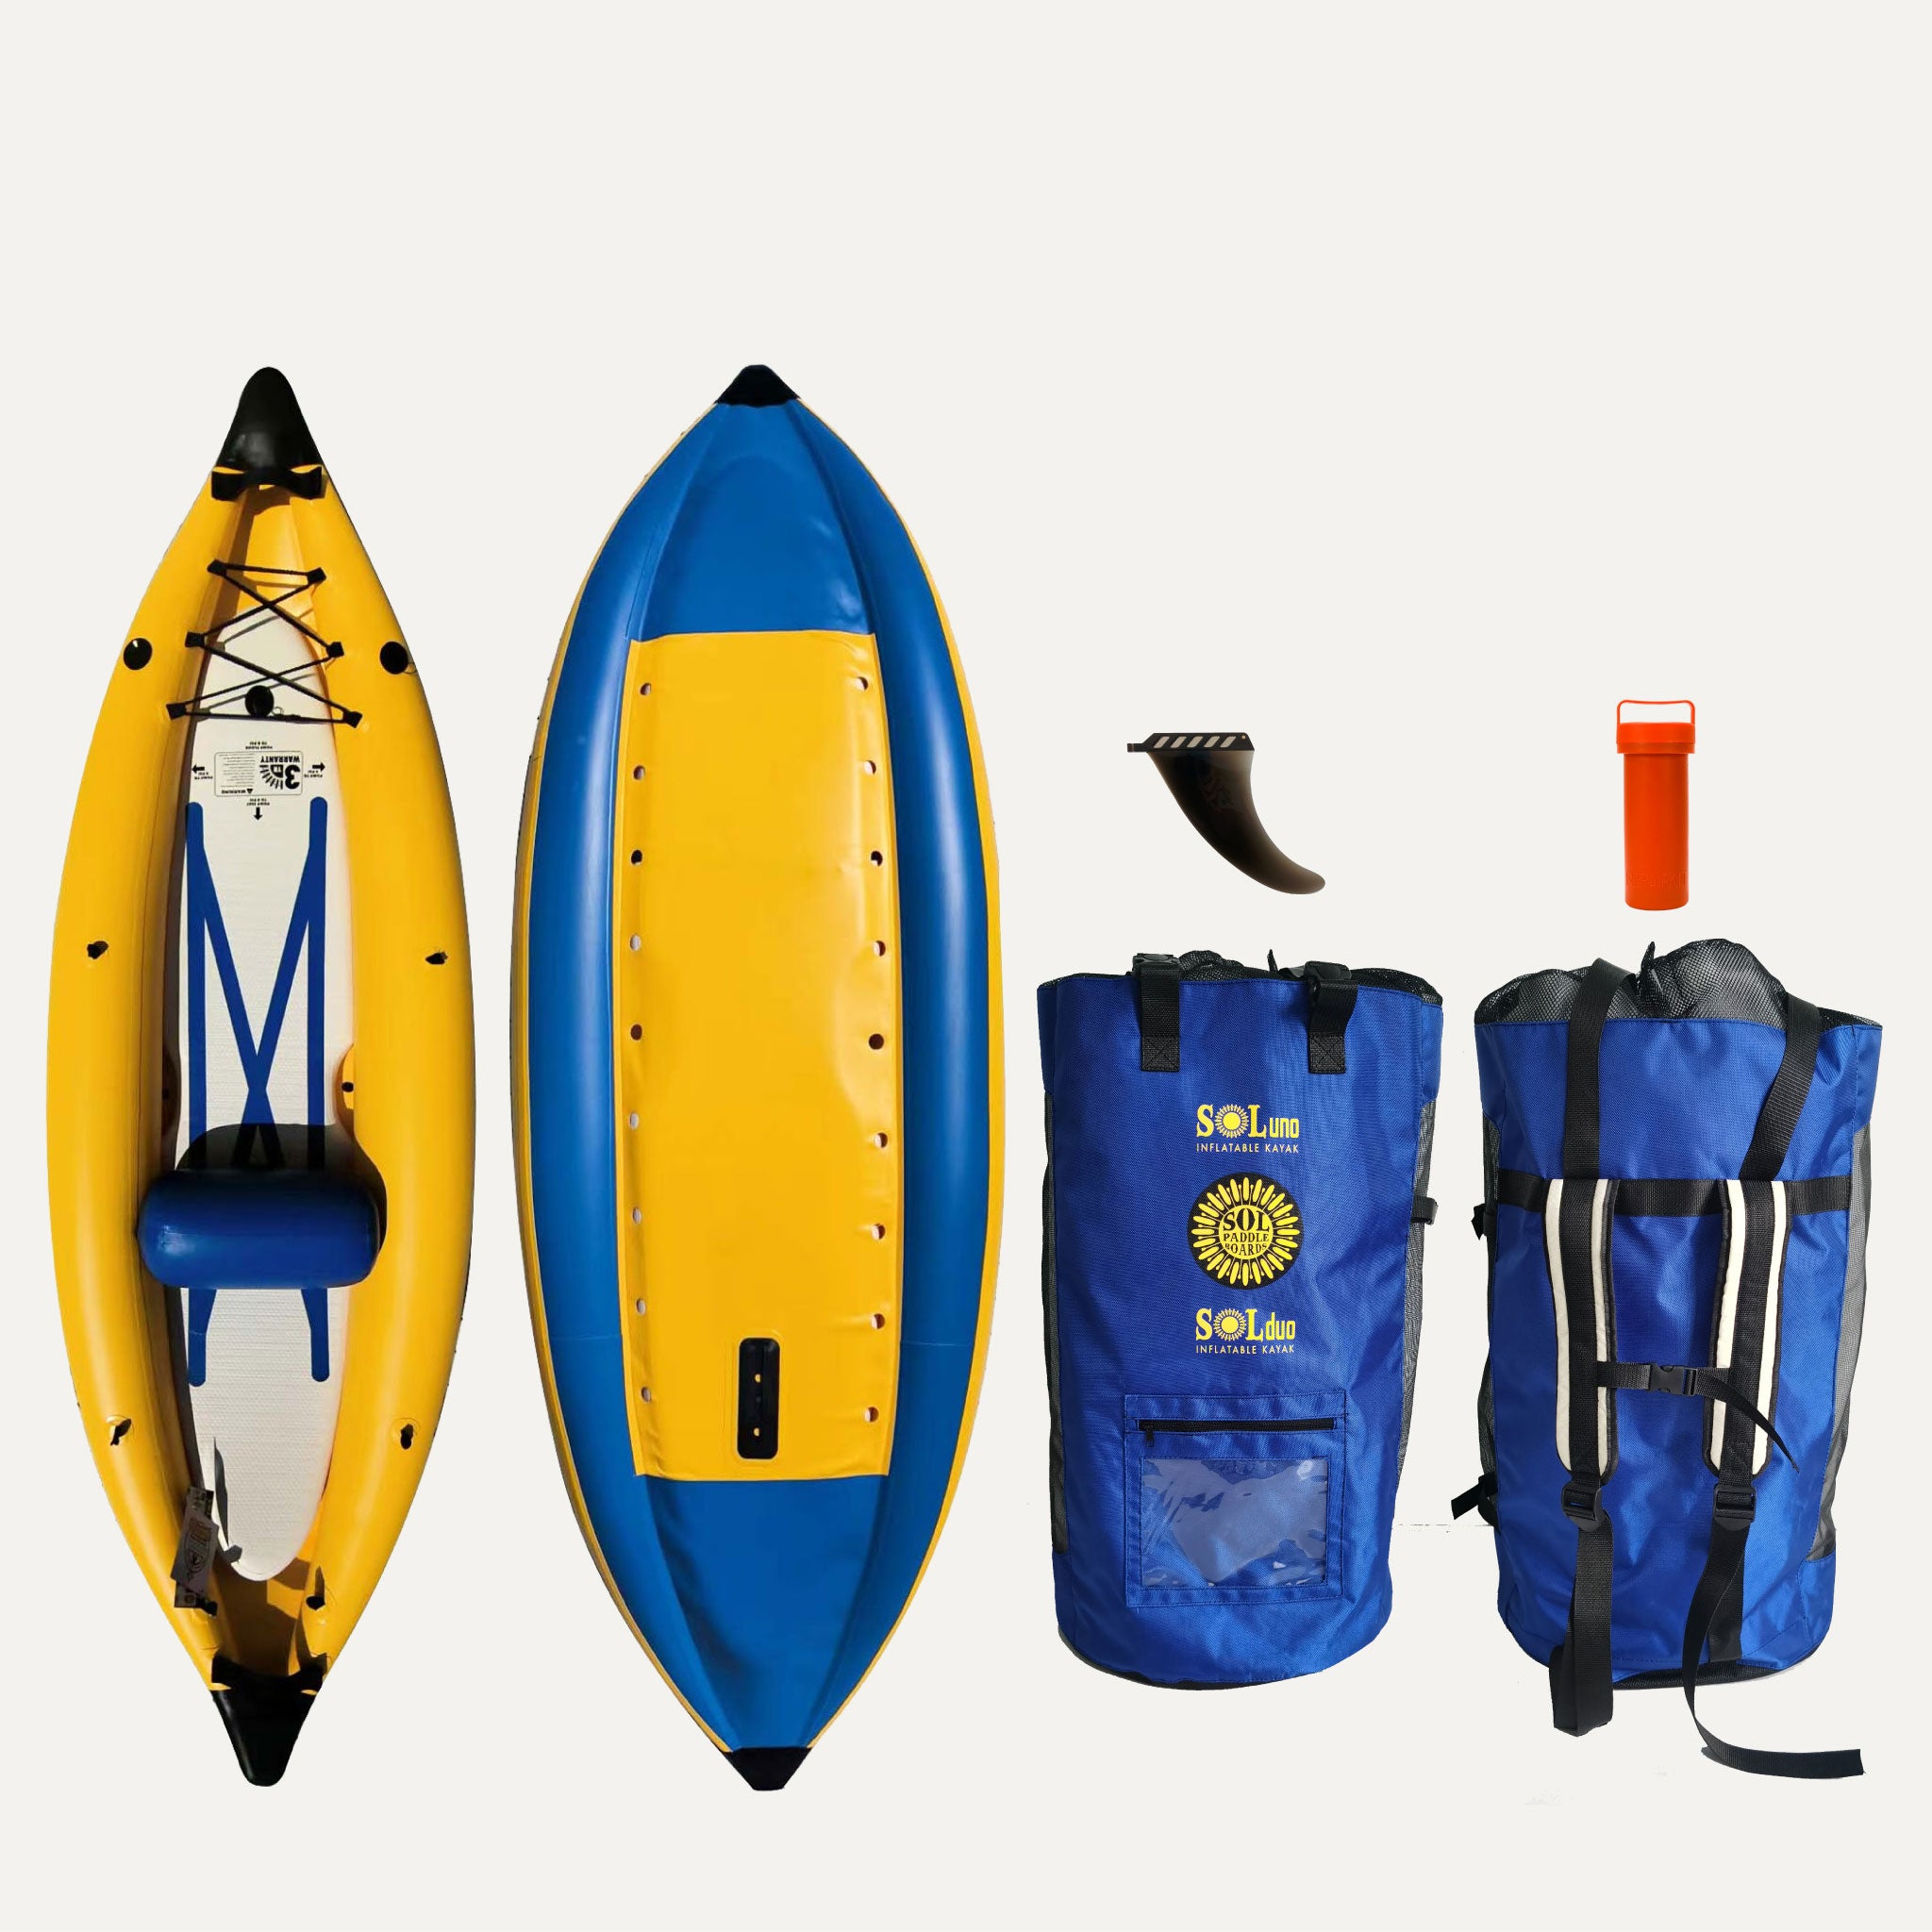 GalaXy SOLuno Single Inflatable Kayak showcasing the top and bottom views of the kayak and the accessories that come with it